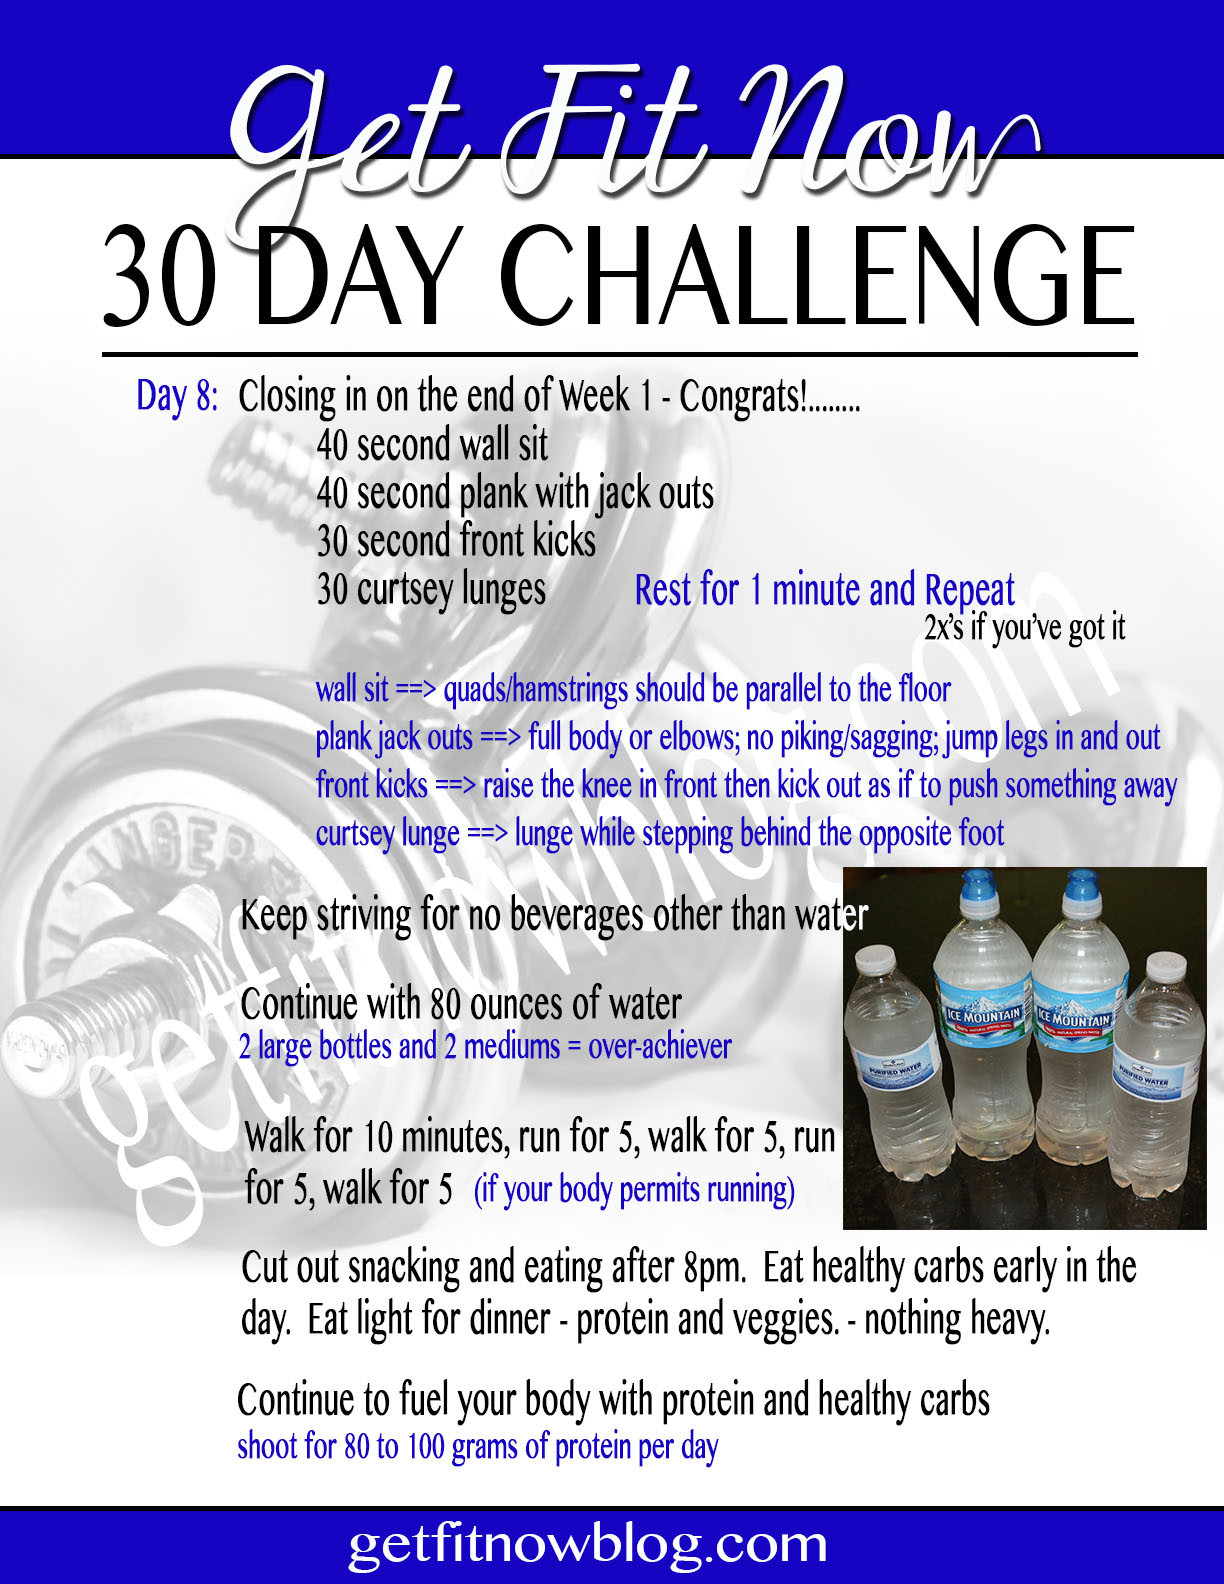 day 8